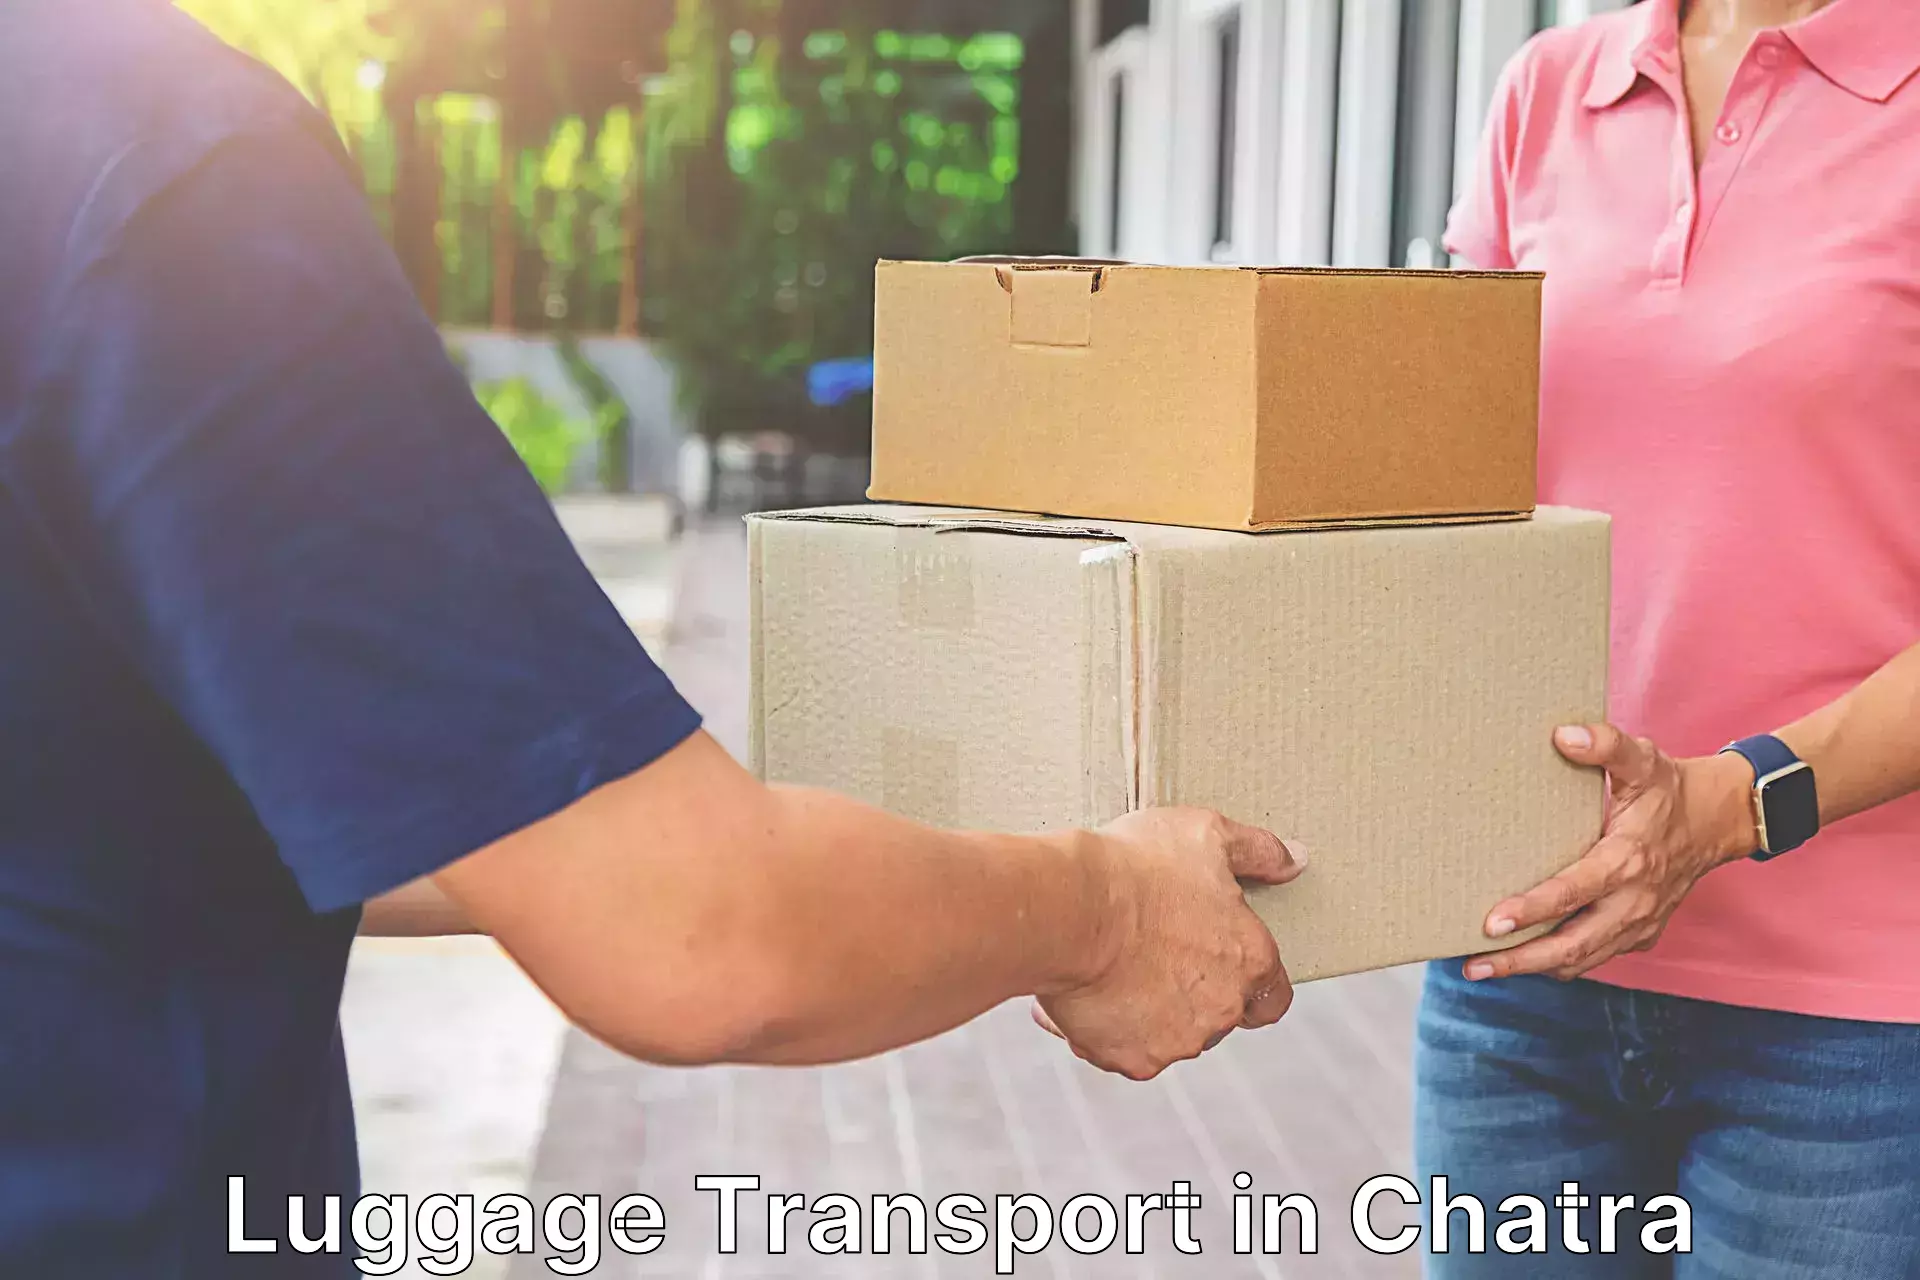 Luggage shipment strategy in Chatra